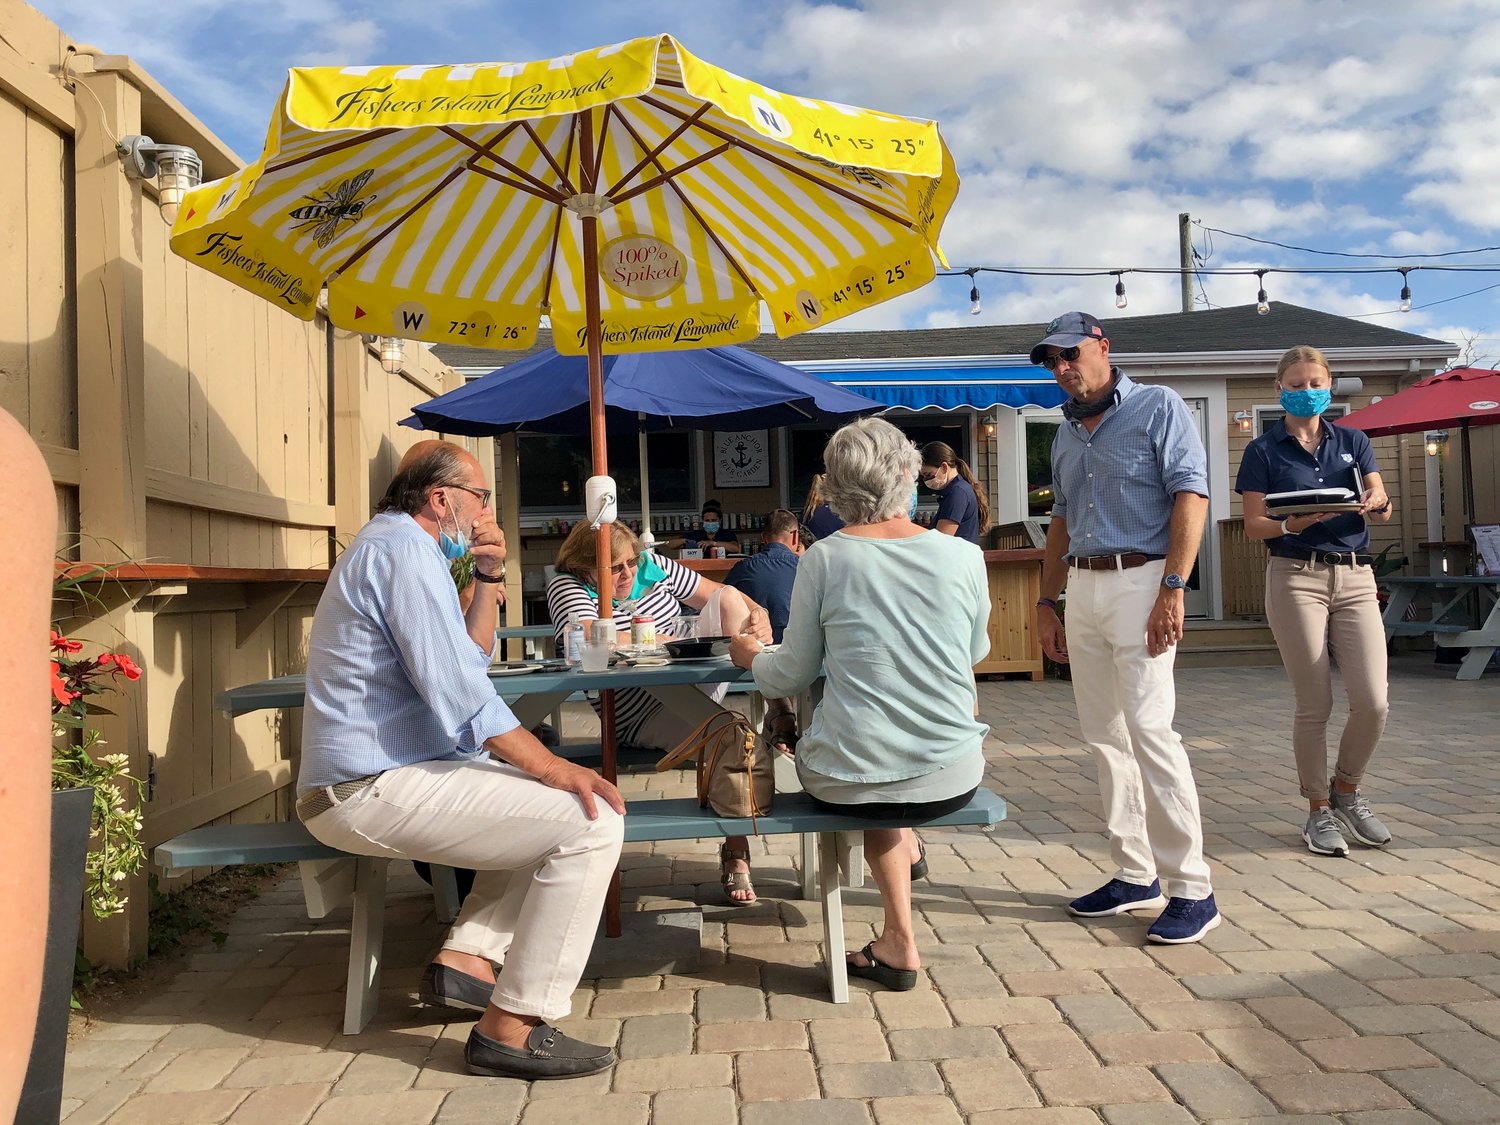 Mike MacFarlane (standing), owner of the new Blue Anchor Beer Garden on Park Avenue, makes the rounds during a sneak preview on Thursday, July 16. The outdoor beer garden is located behind his Blue Anchor restaurant, which has yet to open. Mr. MacFarlane also owns Tremblay's Island Park Bar & Grill next door.